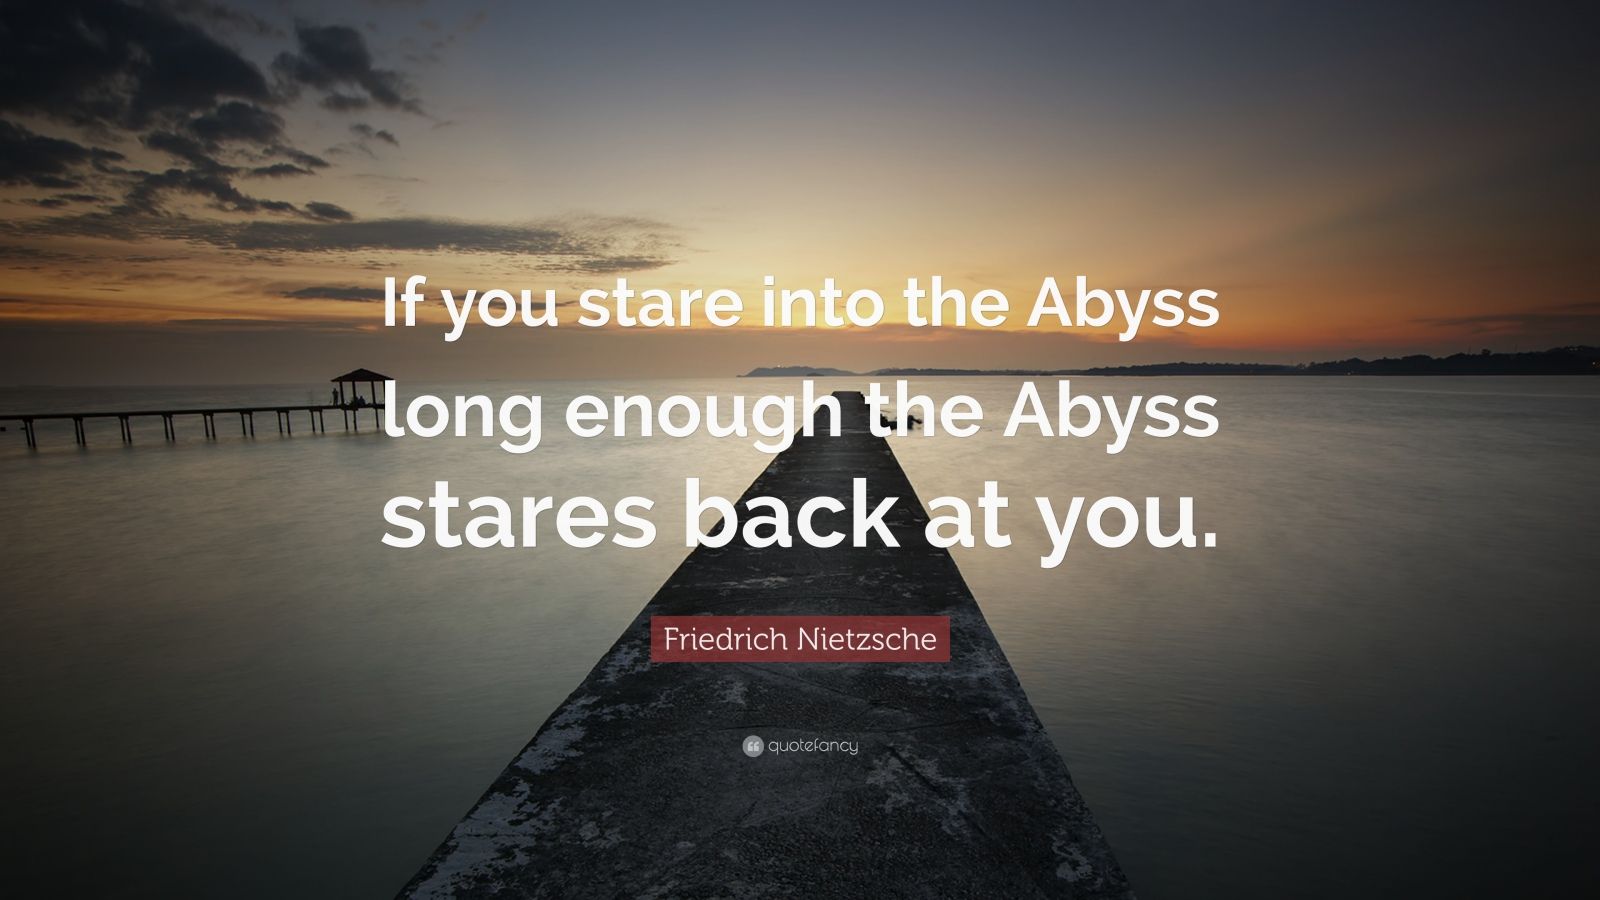 Friedrich Nietzsche Quote: “If you stare into the Abyss long enough the